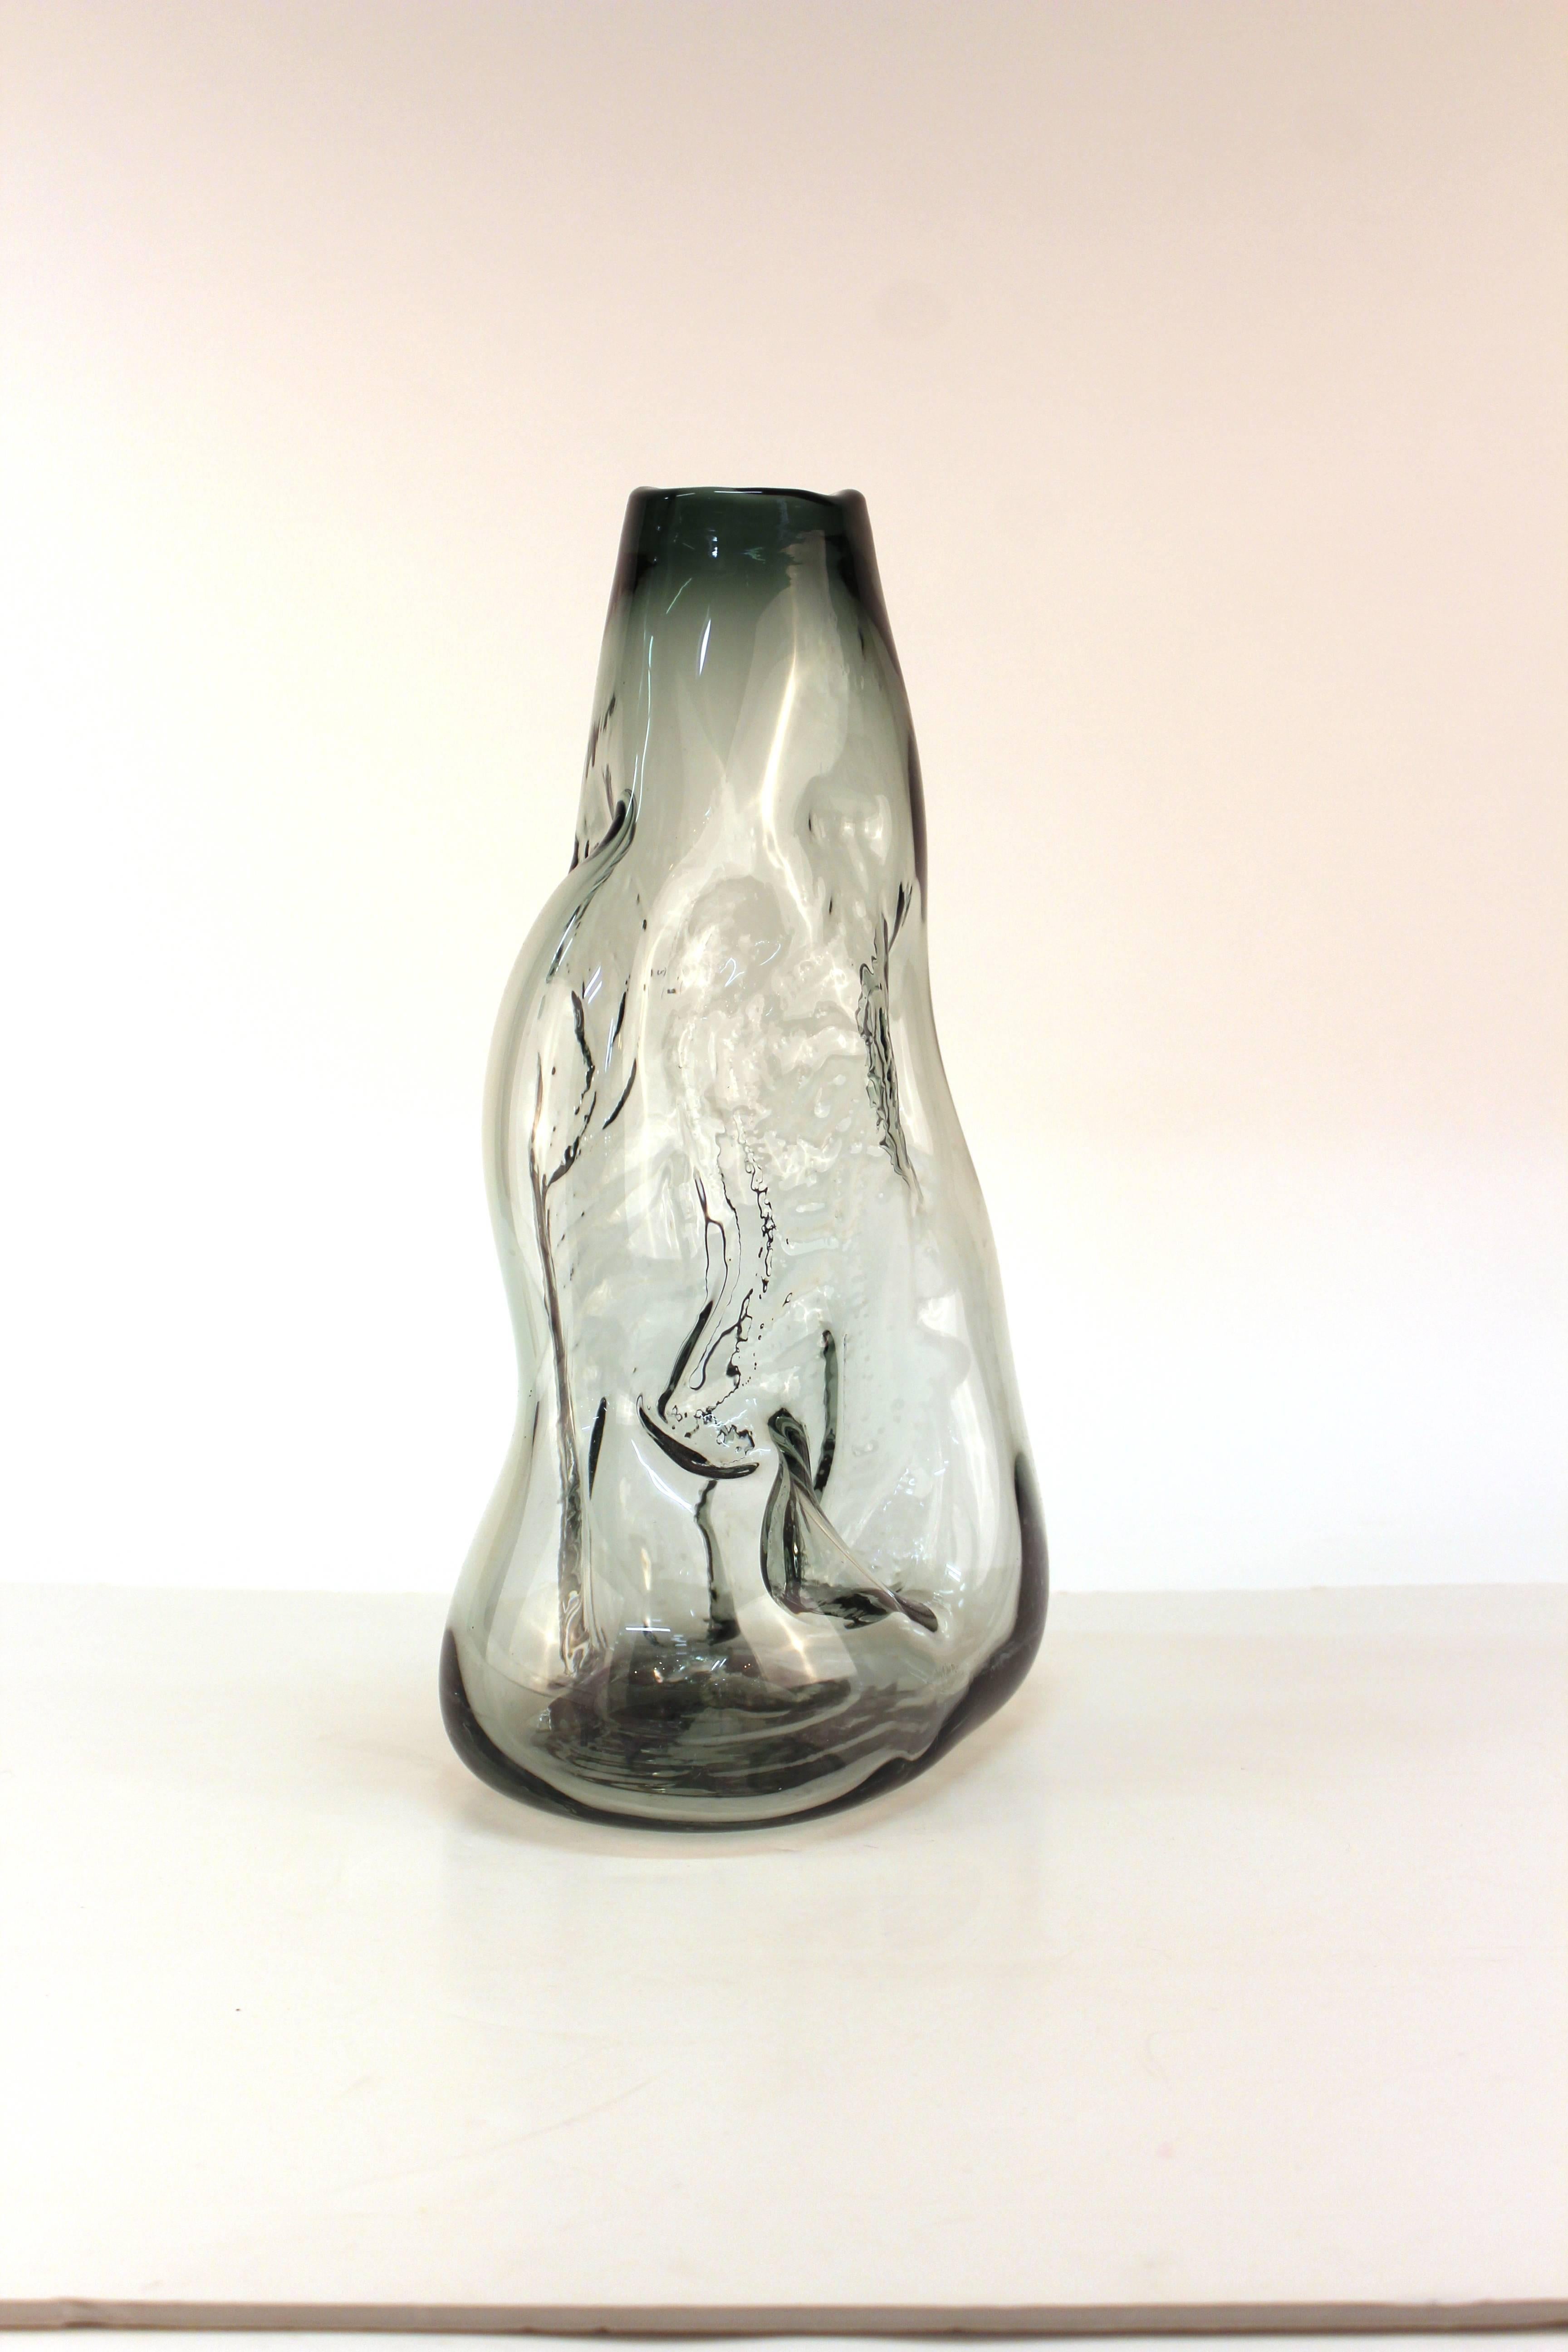 Don Shepherd for Jonynas and Shepherd Studio, glass vase blown into organic shape. The vase is in a pale smokey gray and features impressed designs. Includes raised pontil on the bottom from the crafting process. Crafted during the 1970s the piece